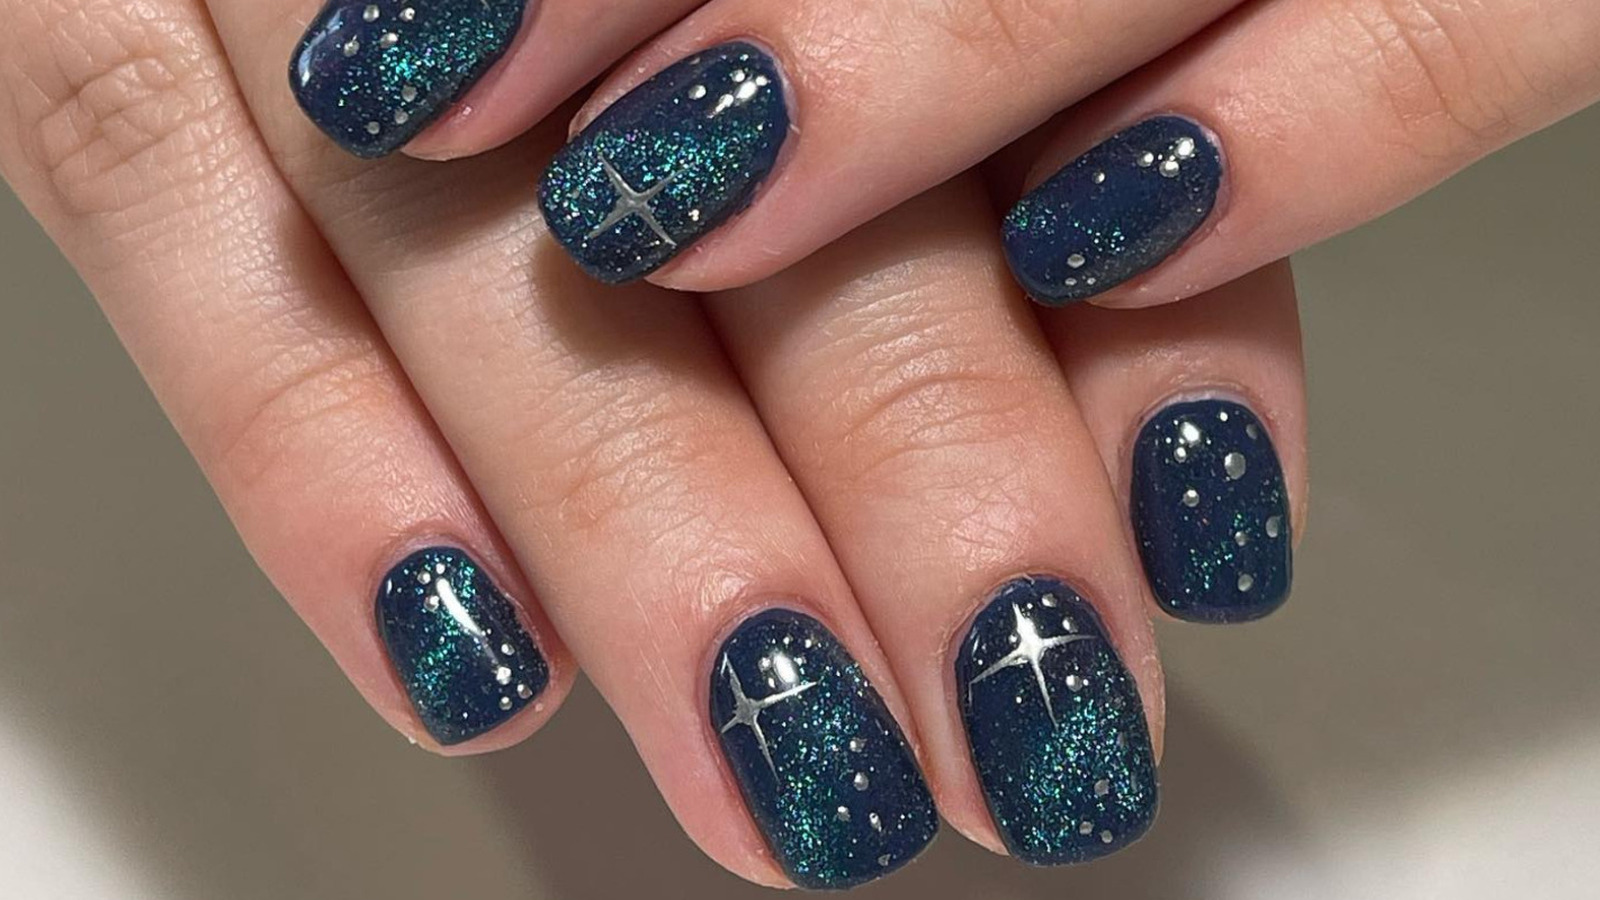 3. Playful Galaxy Nail Art Designs for Your Next Manicure - wide 8